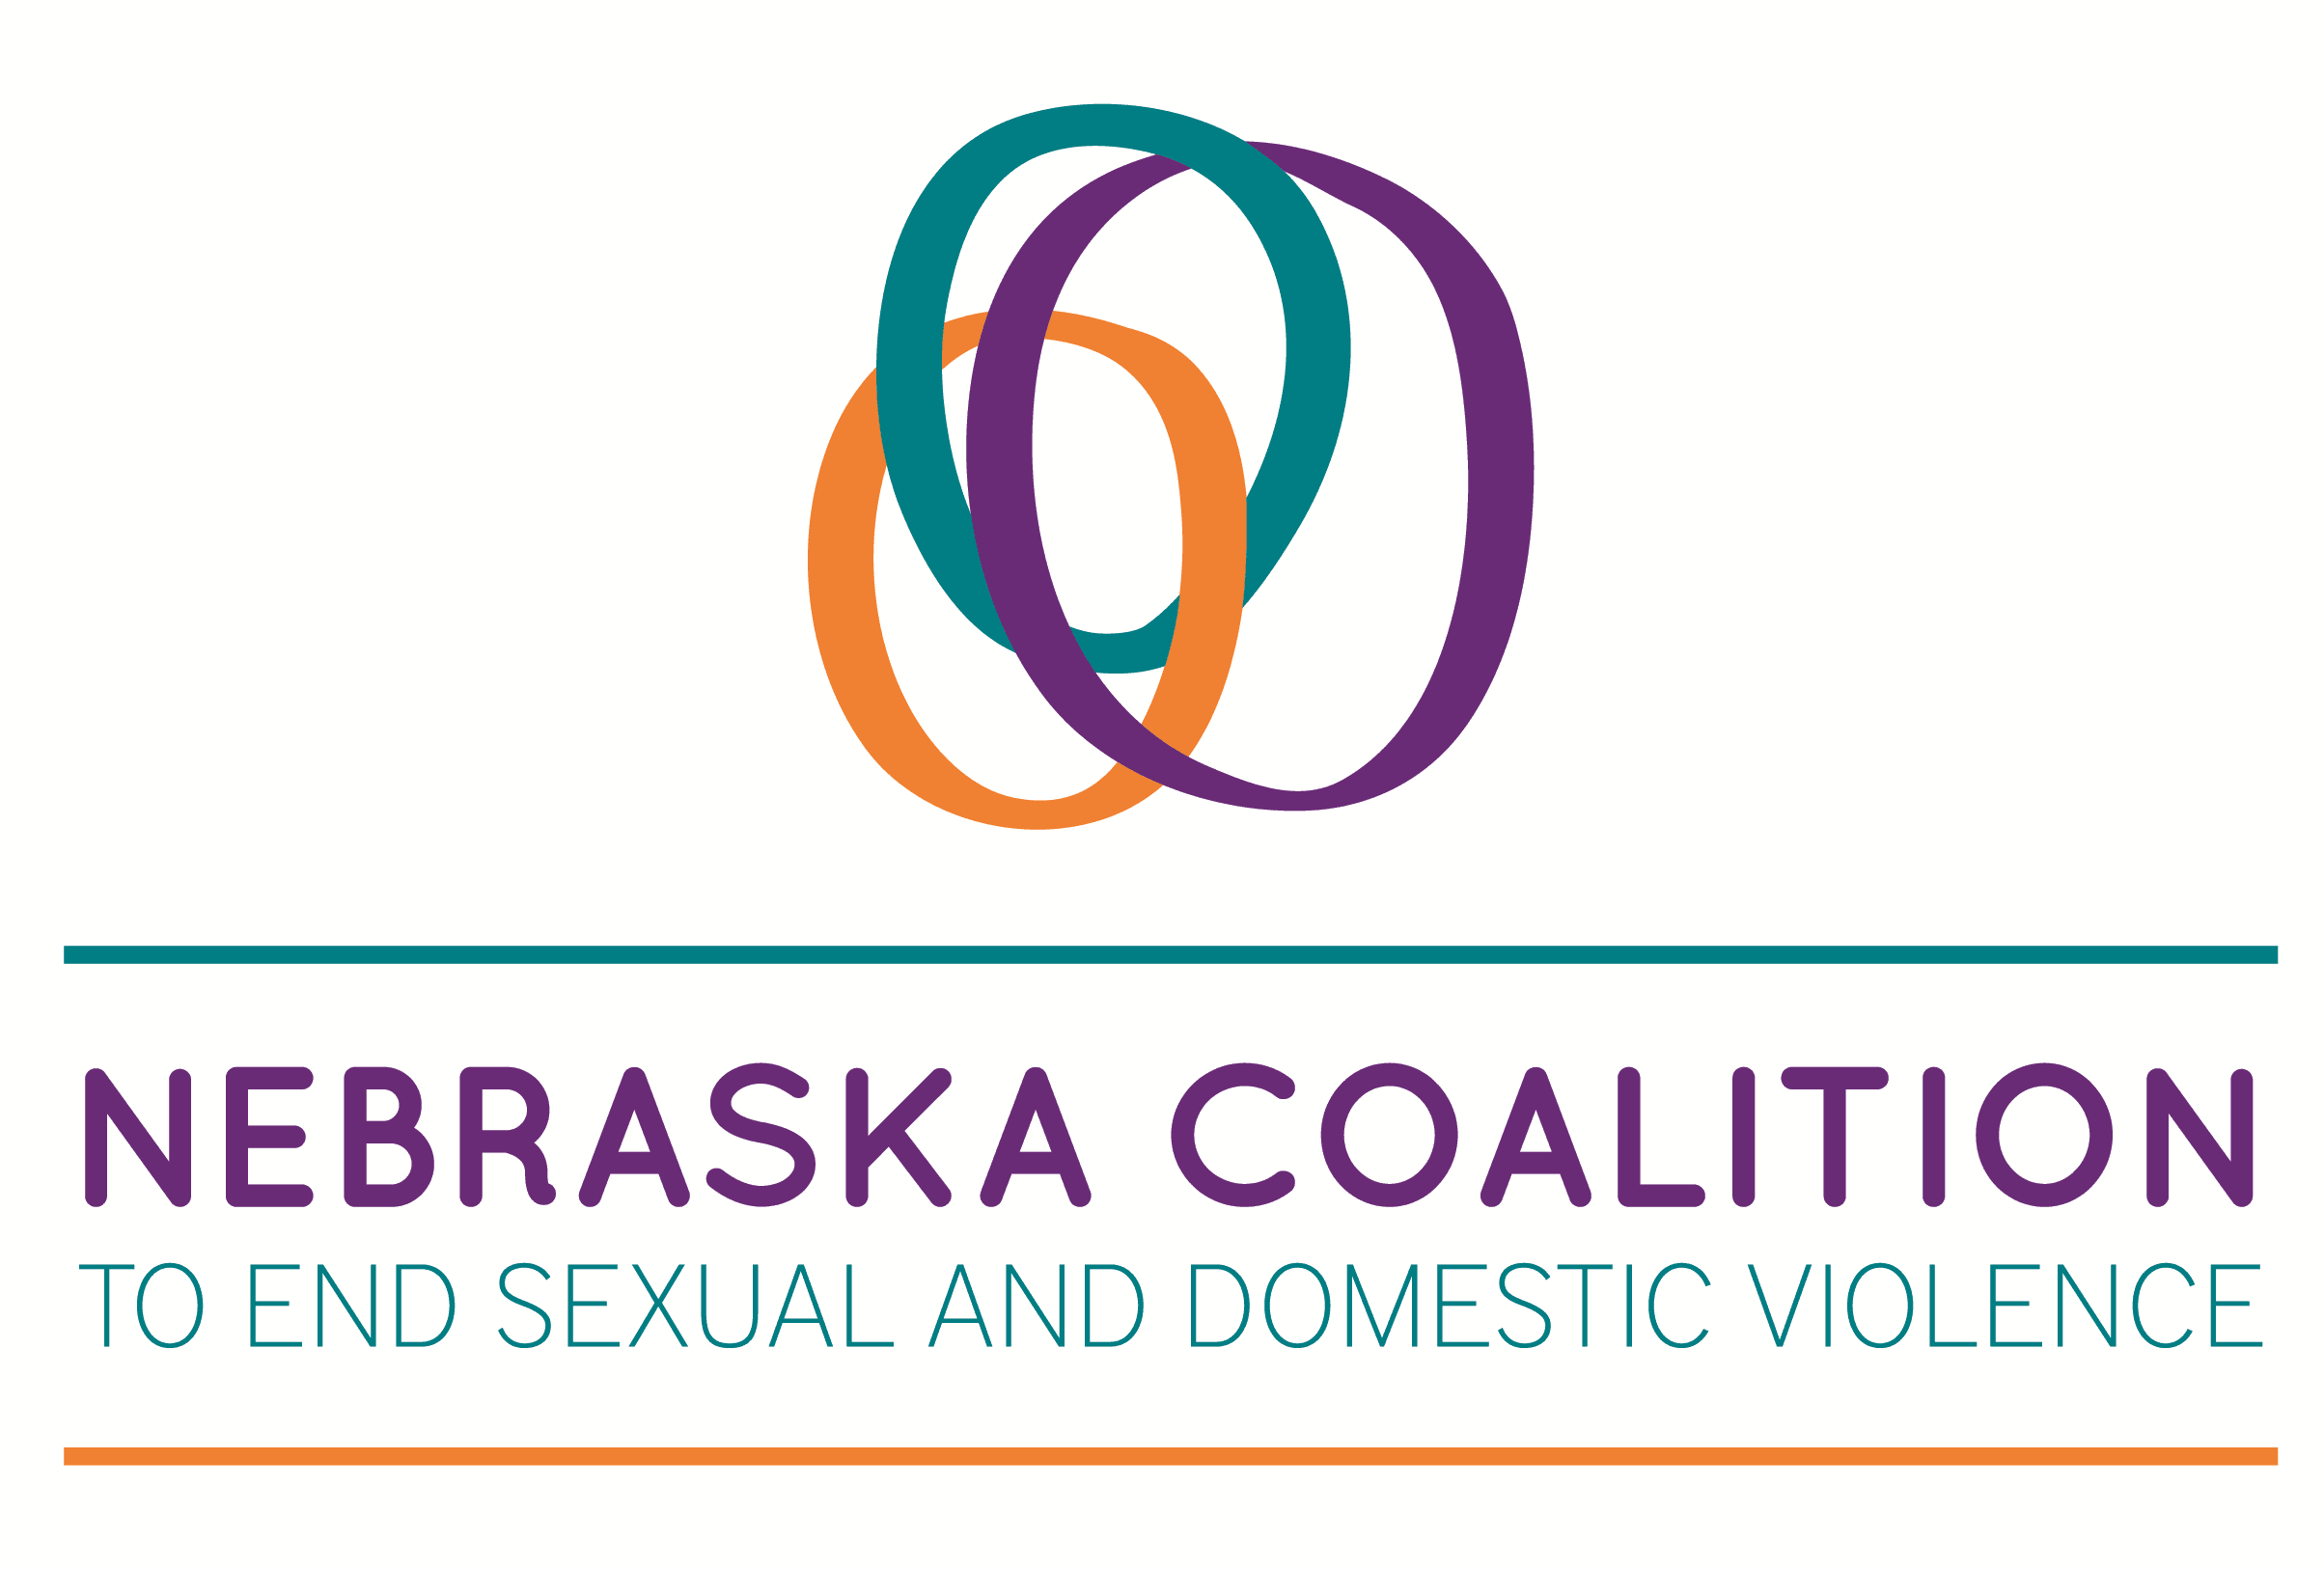 Nebraska Coalition to End Sexual and Domestic Violence